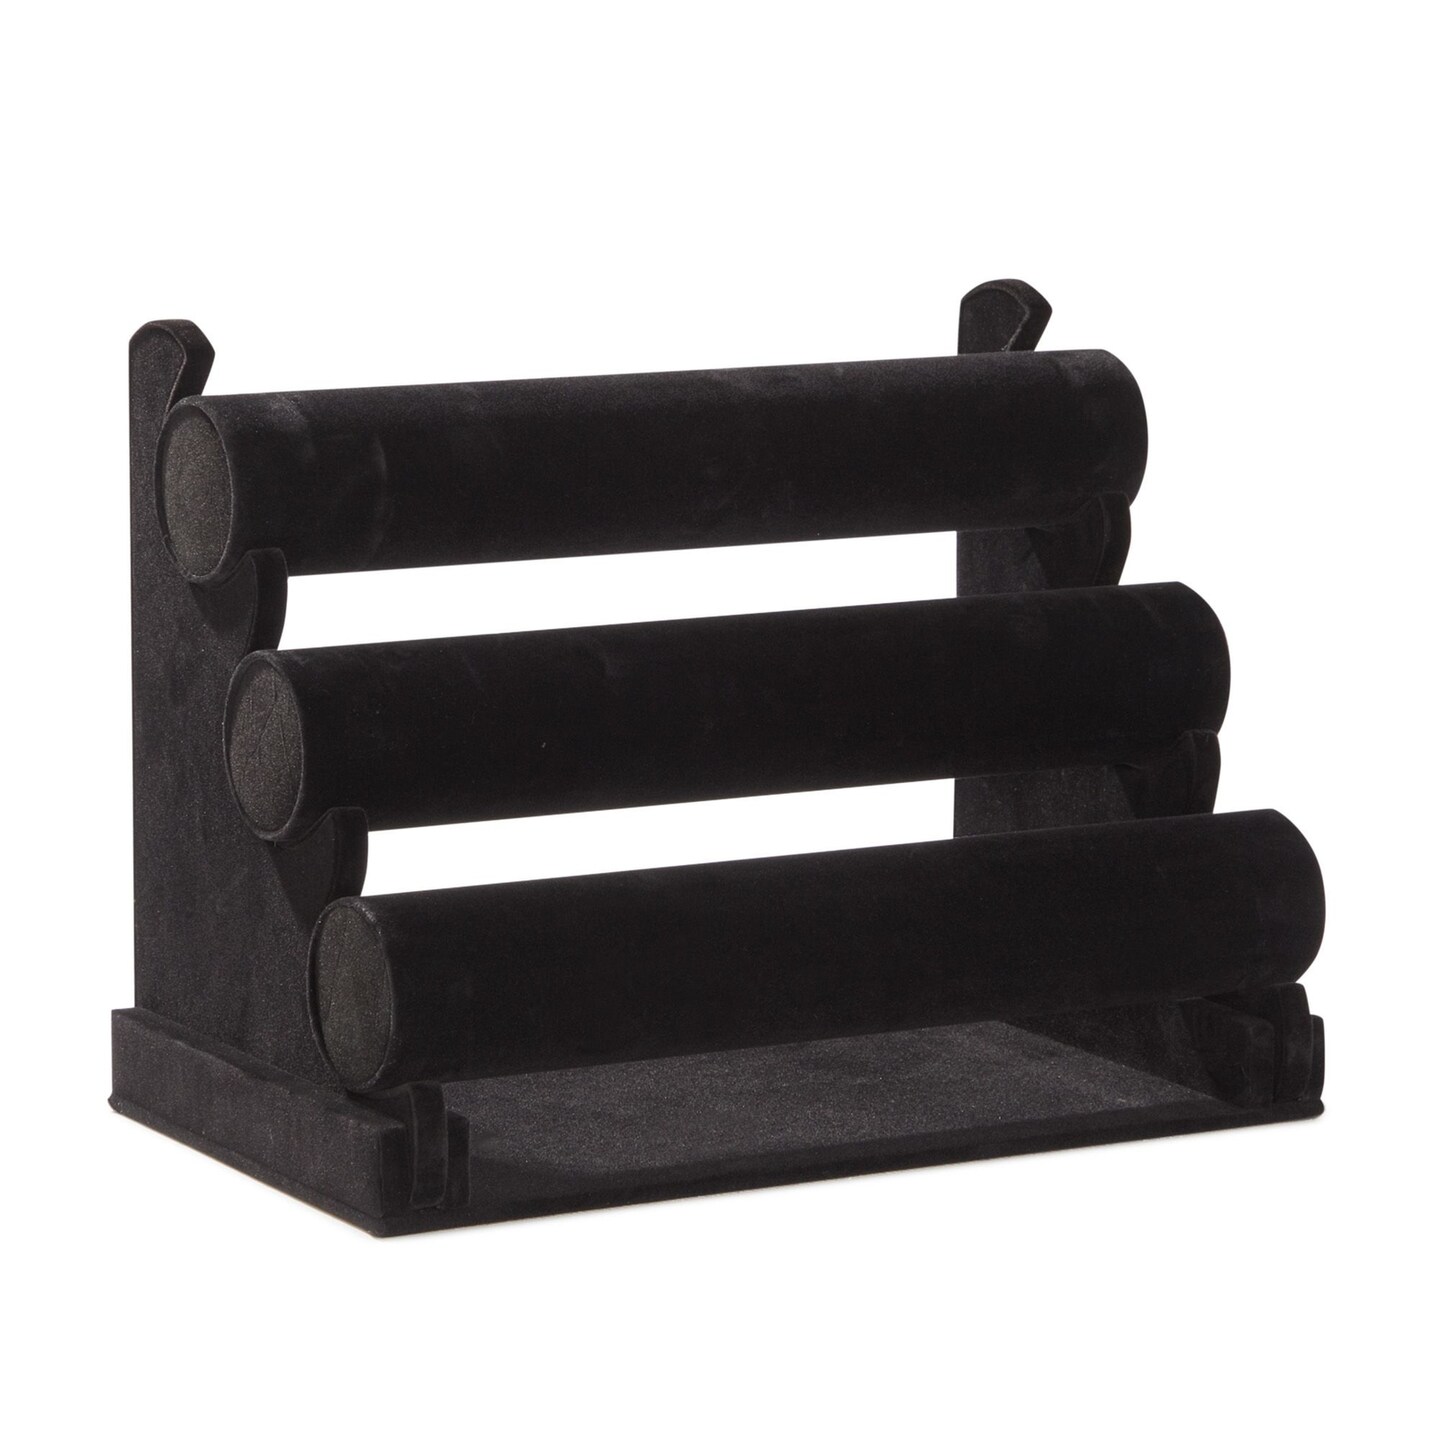 3-Tier Velvet Bracelet Holder Stand and Organizer - Jewelry Display Rack for Selling Necklaces and Accessories (Black)